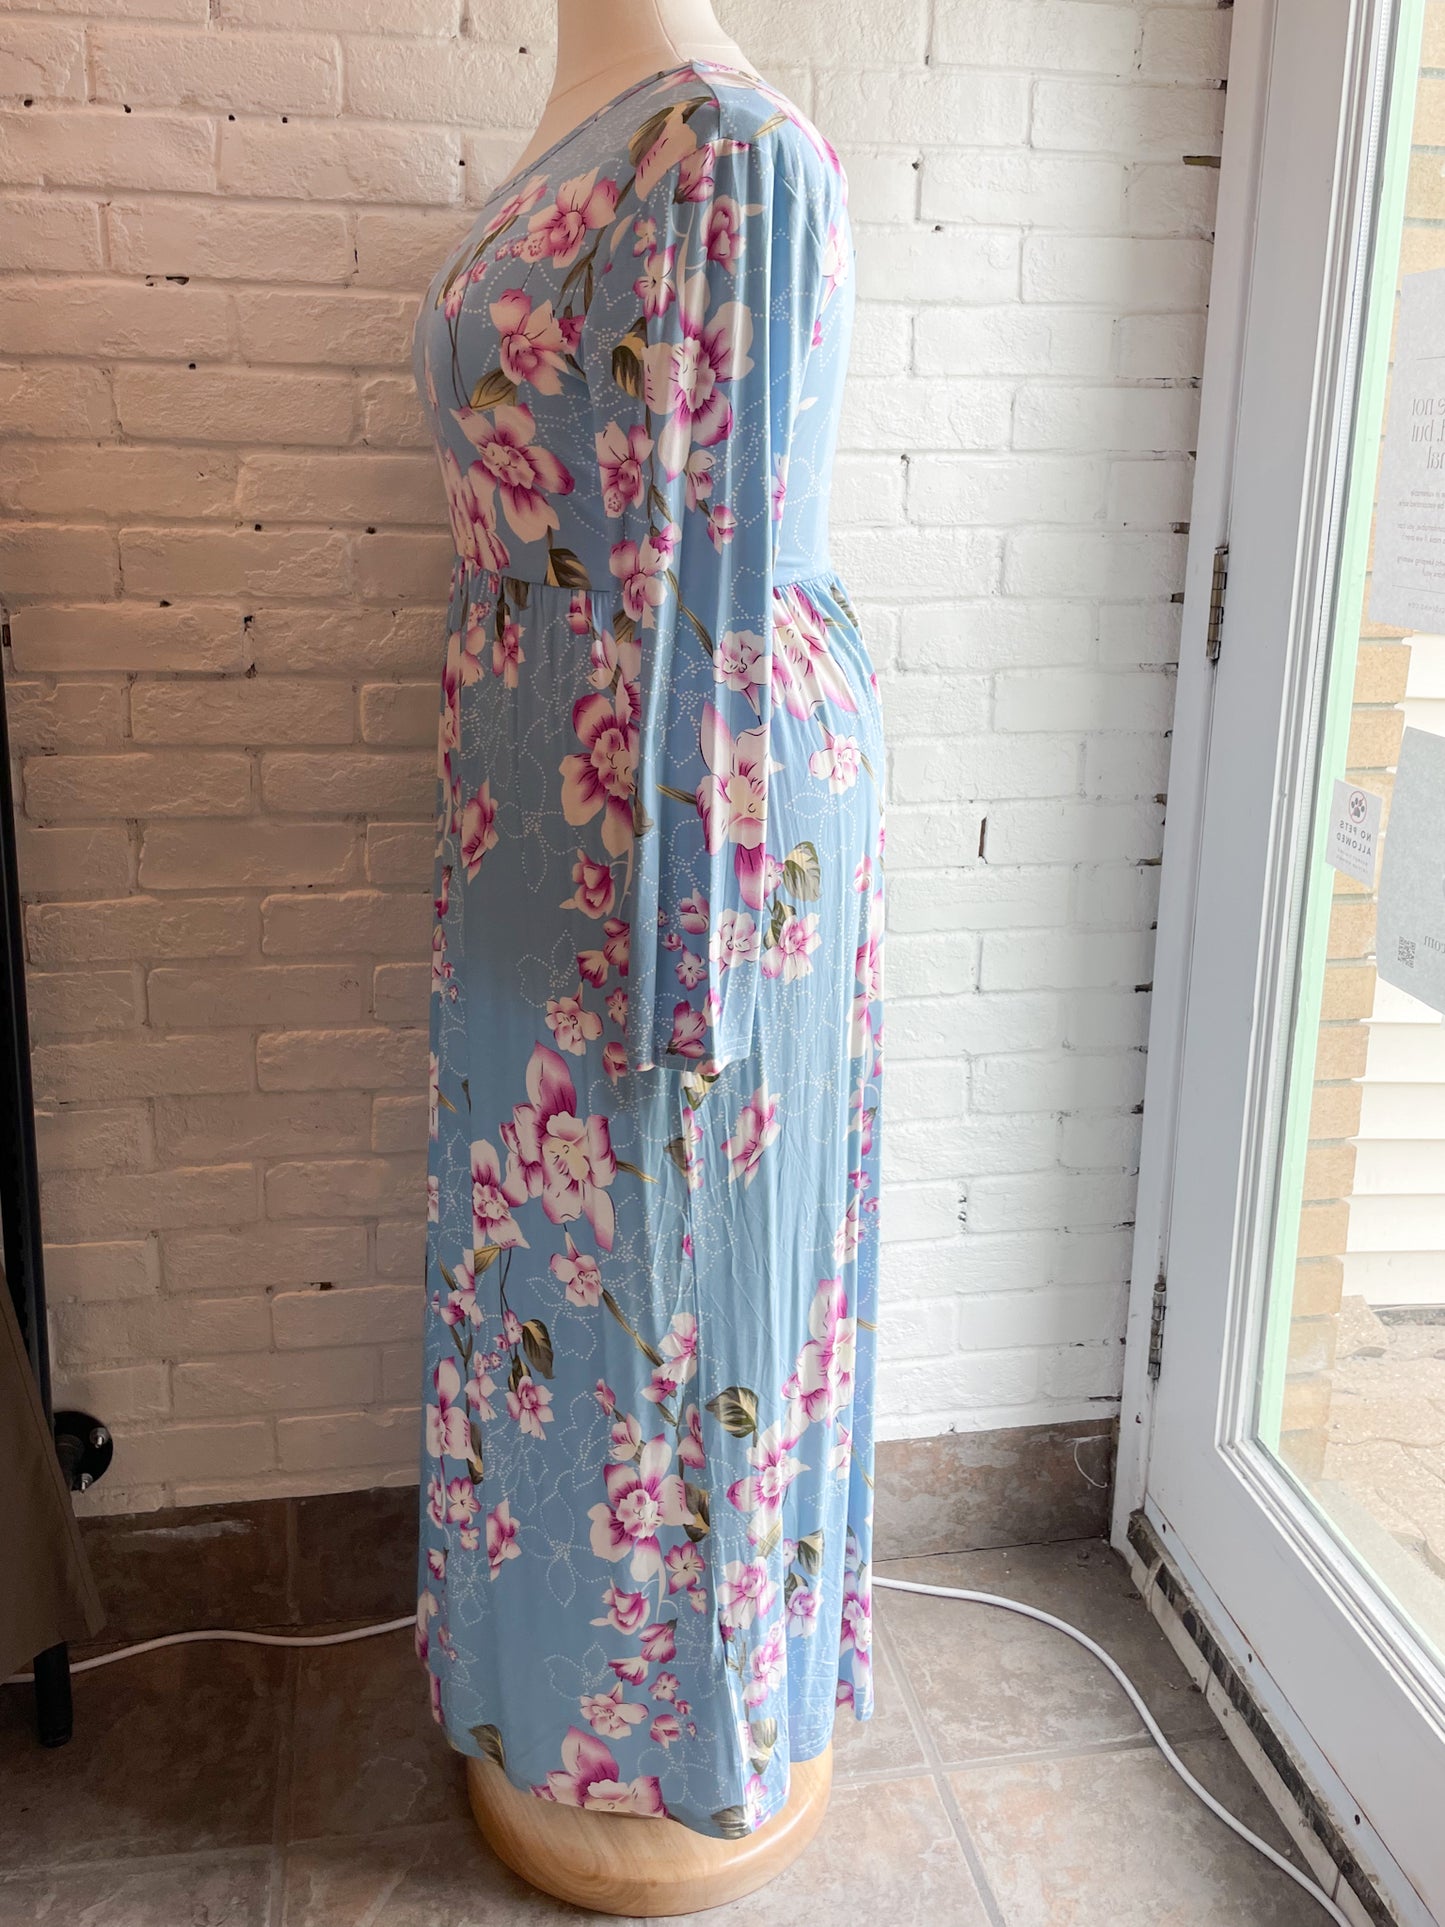 Bishuige Long Sleeved Sky Blue Floral Maxi Dress NWT - XL/2XL